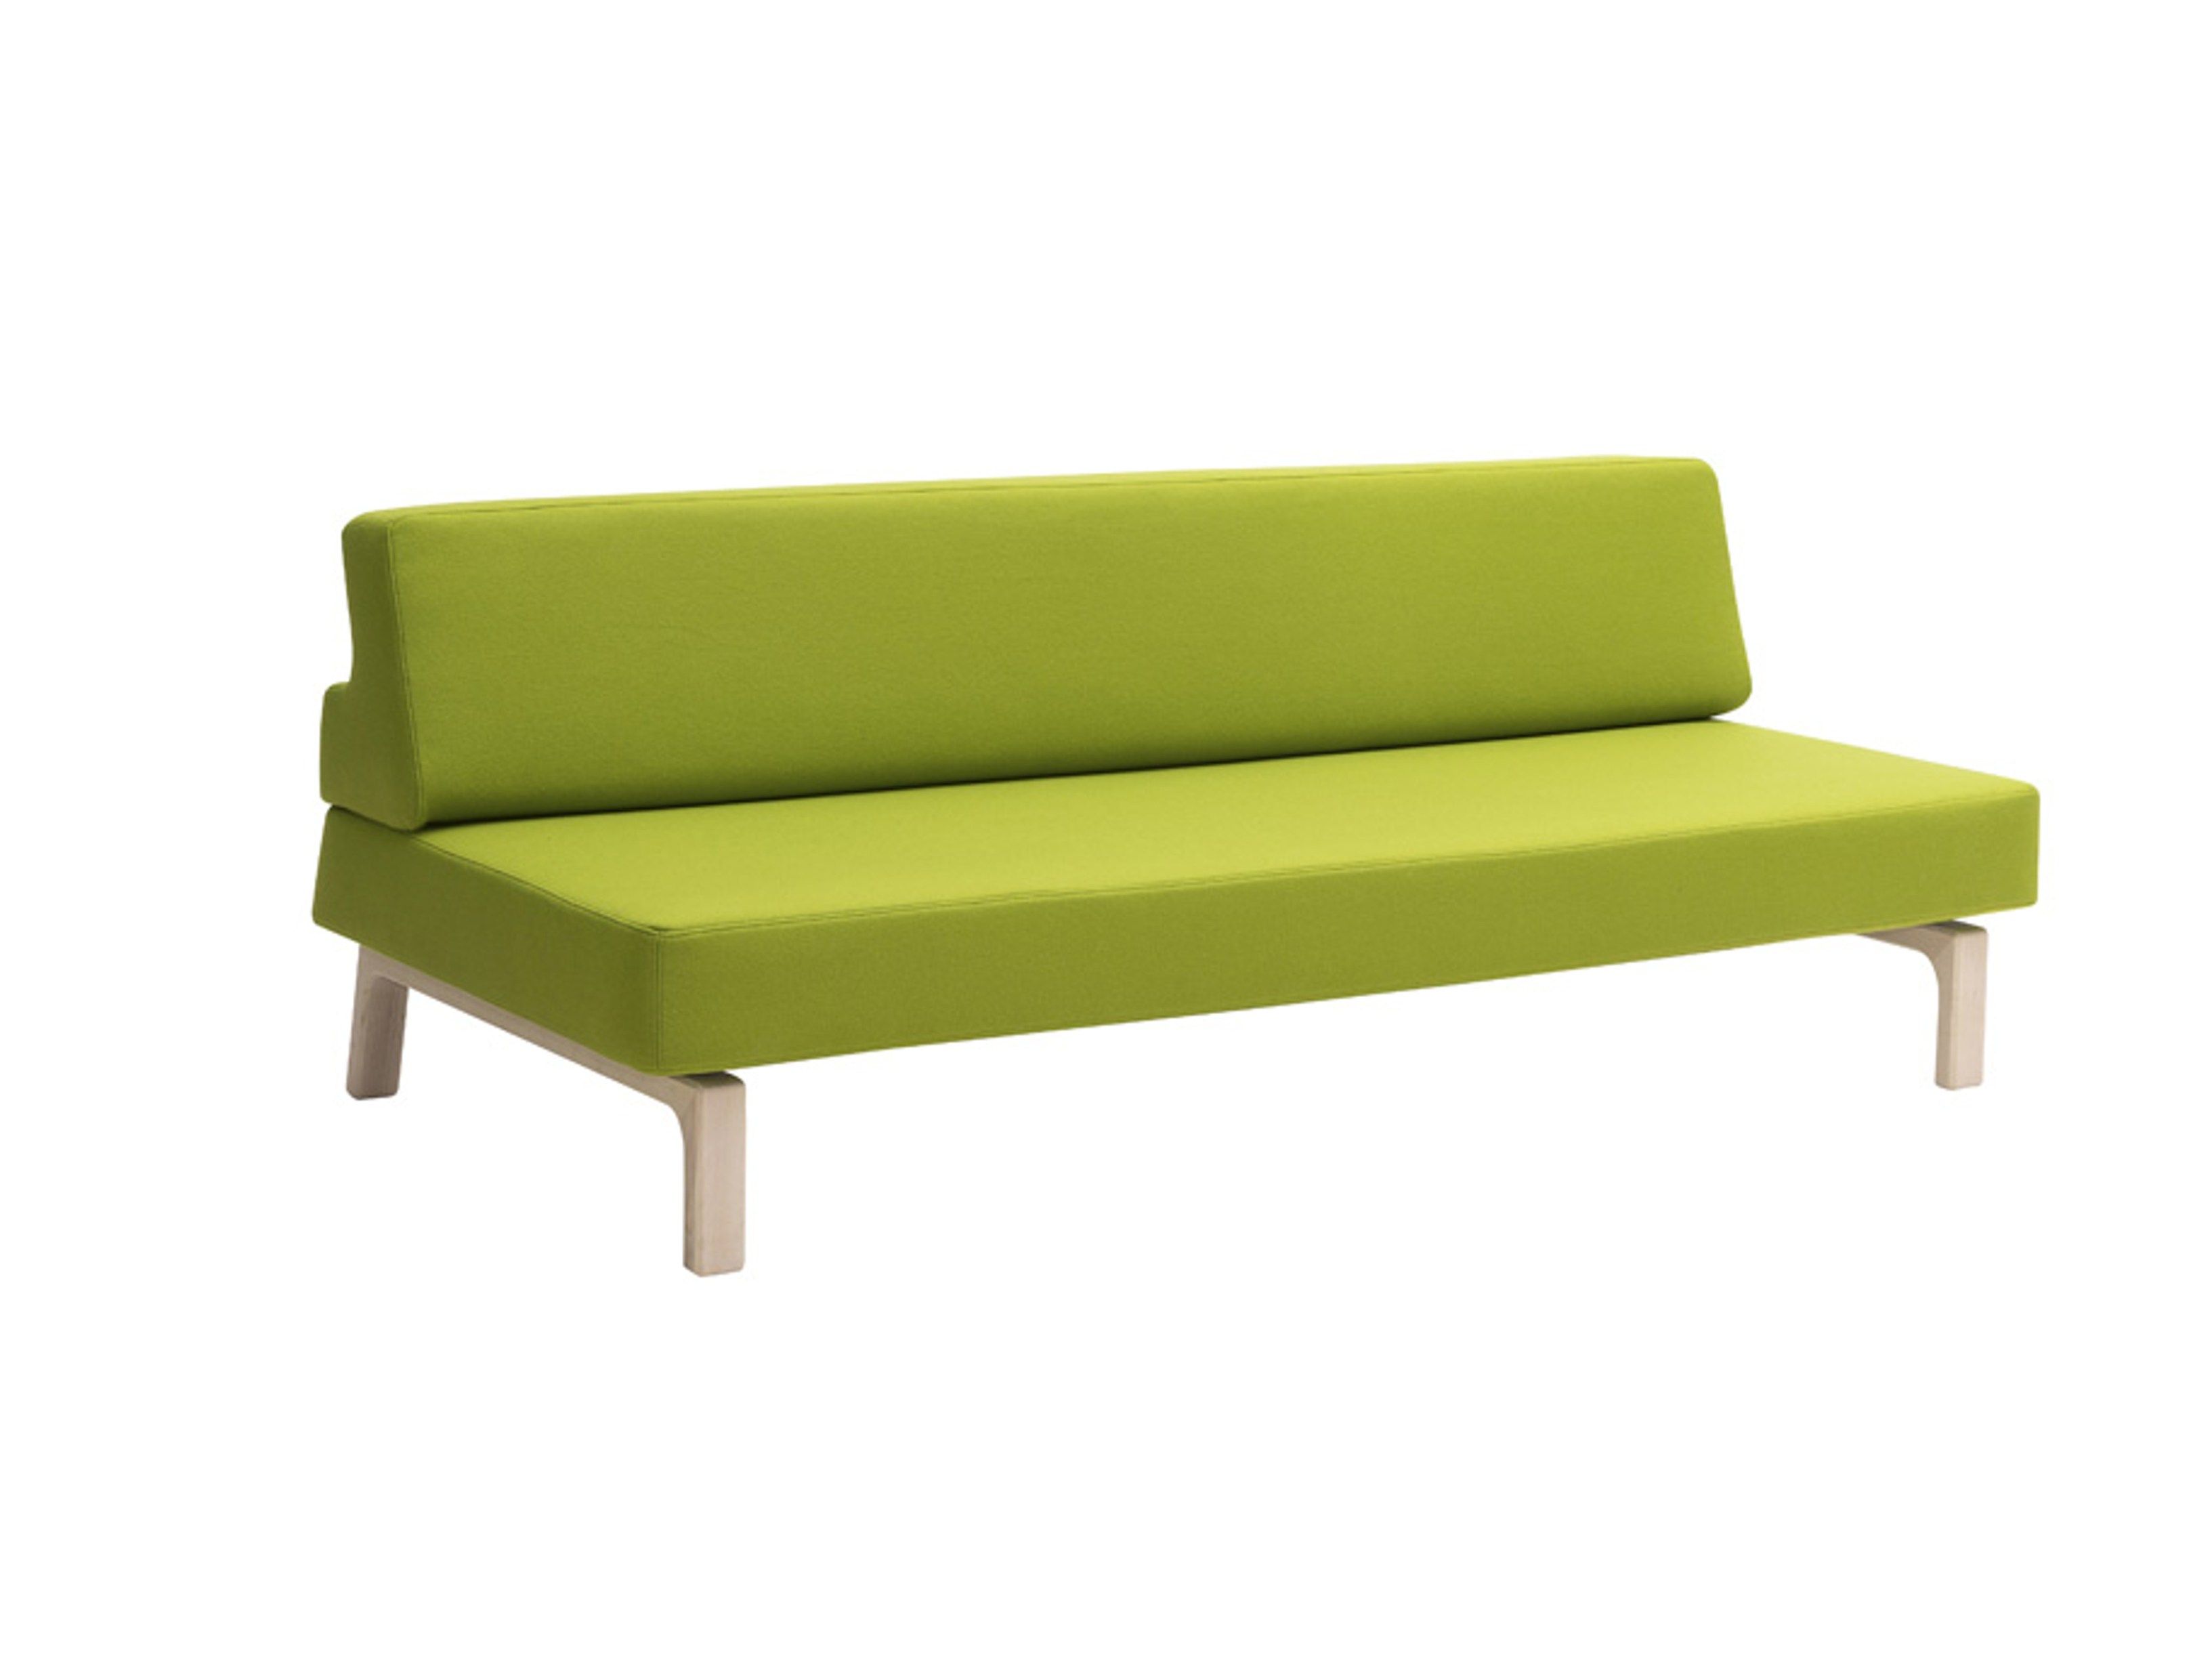 Sofa bed Lazy by Softline